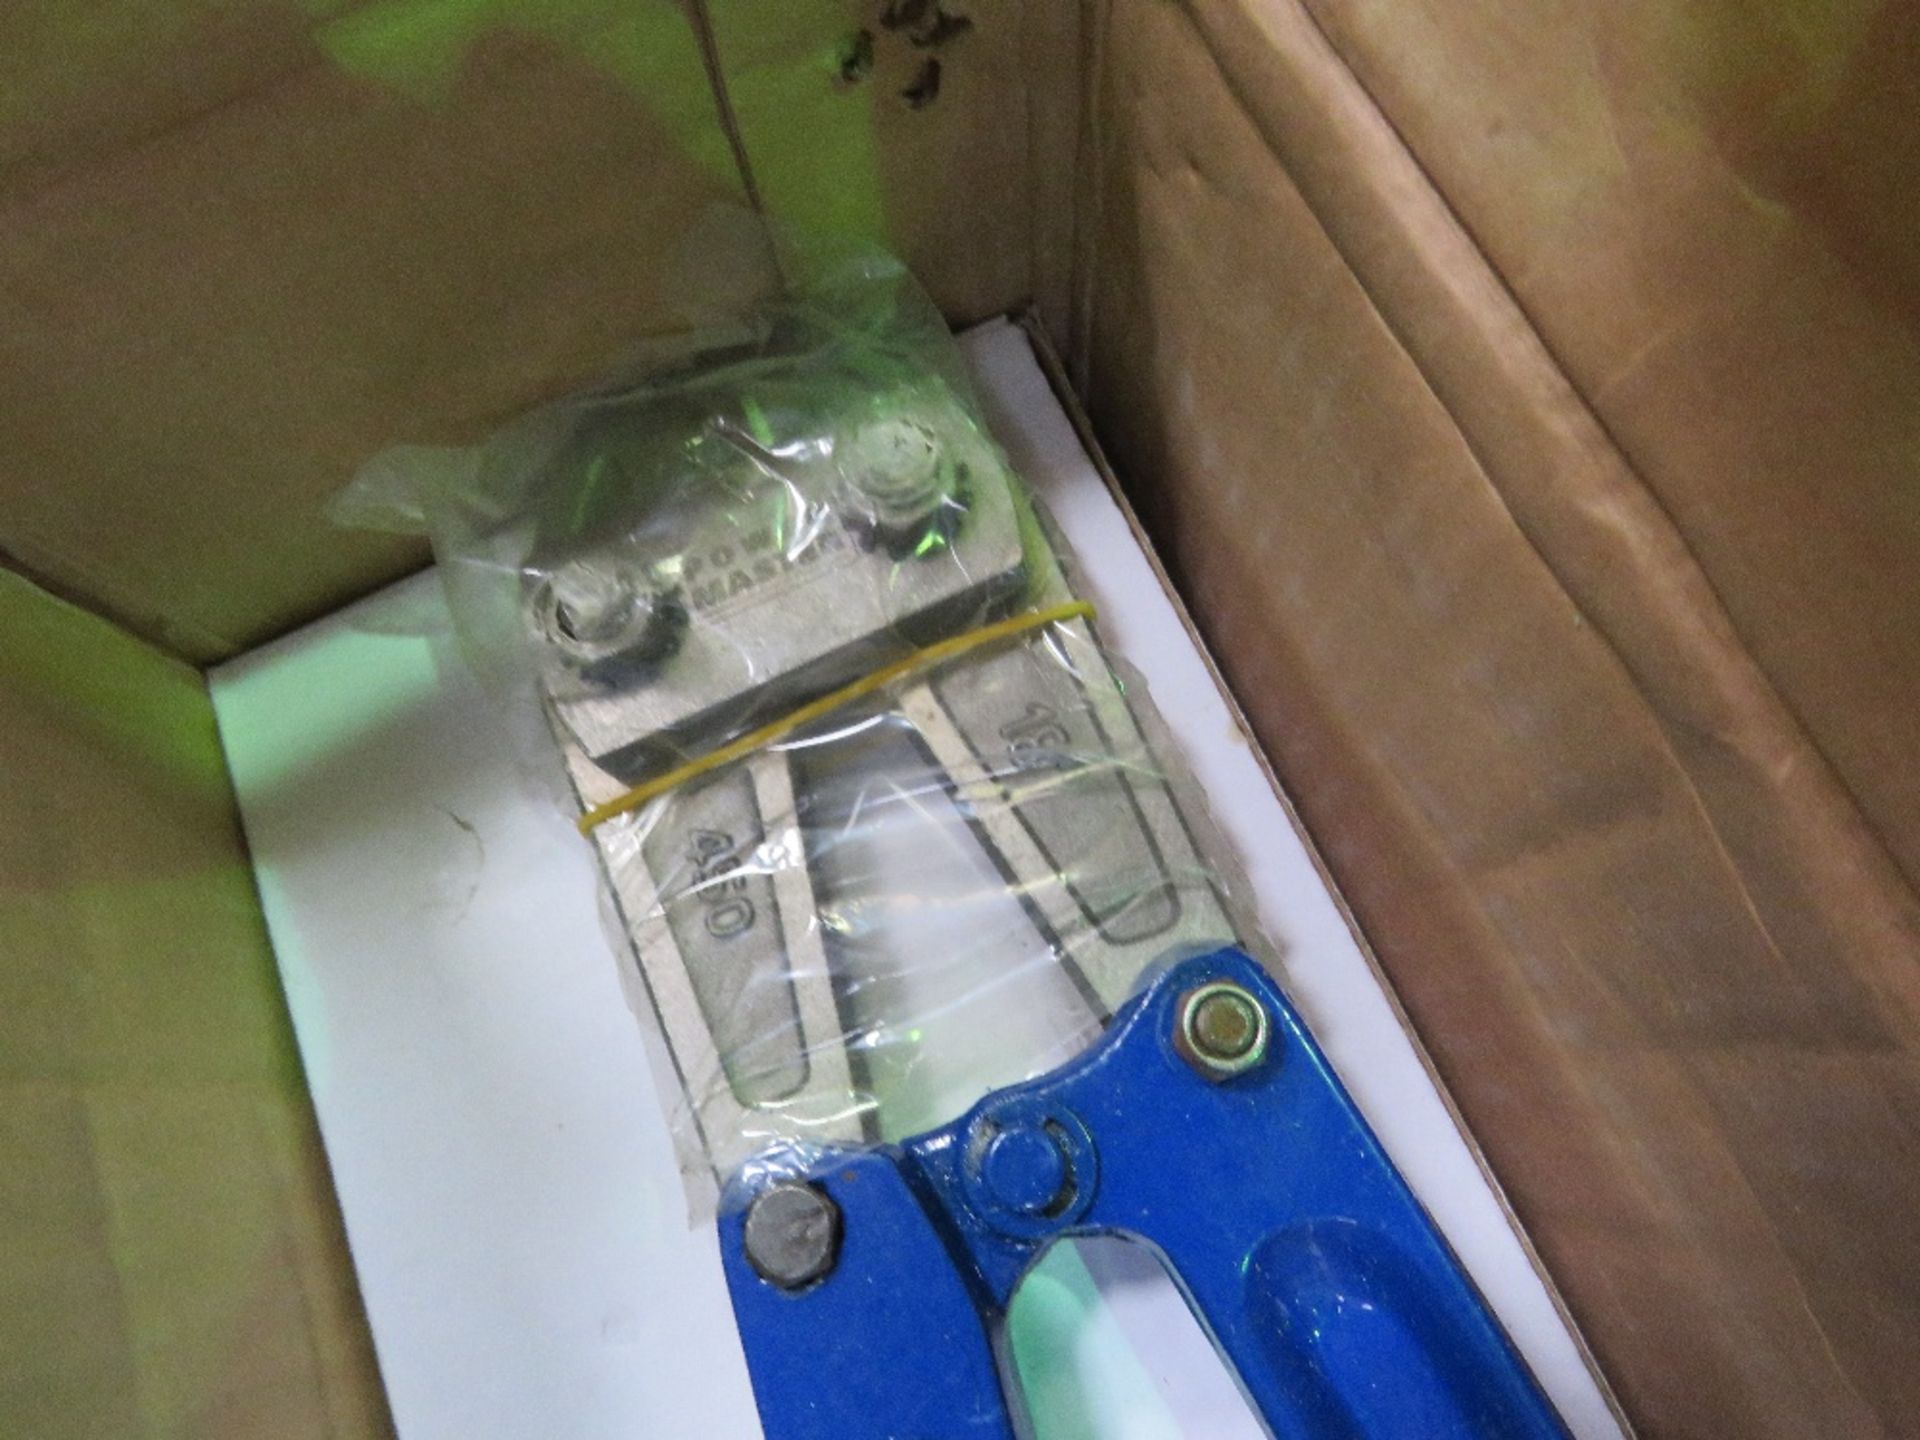 5 X BOLT CROPPERS, UNUSED. - Image 2 of 2